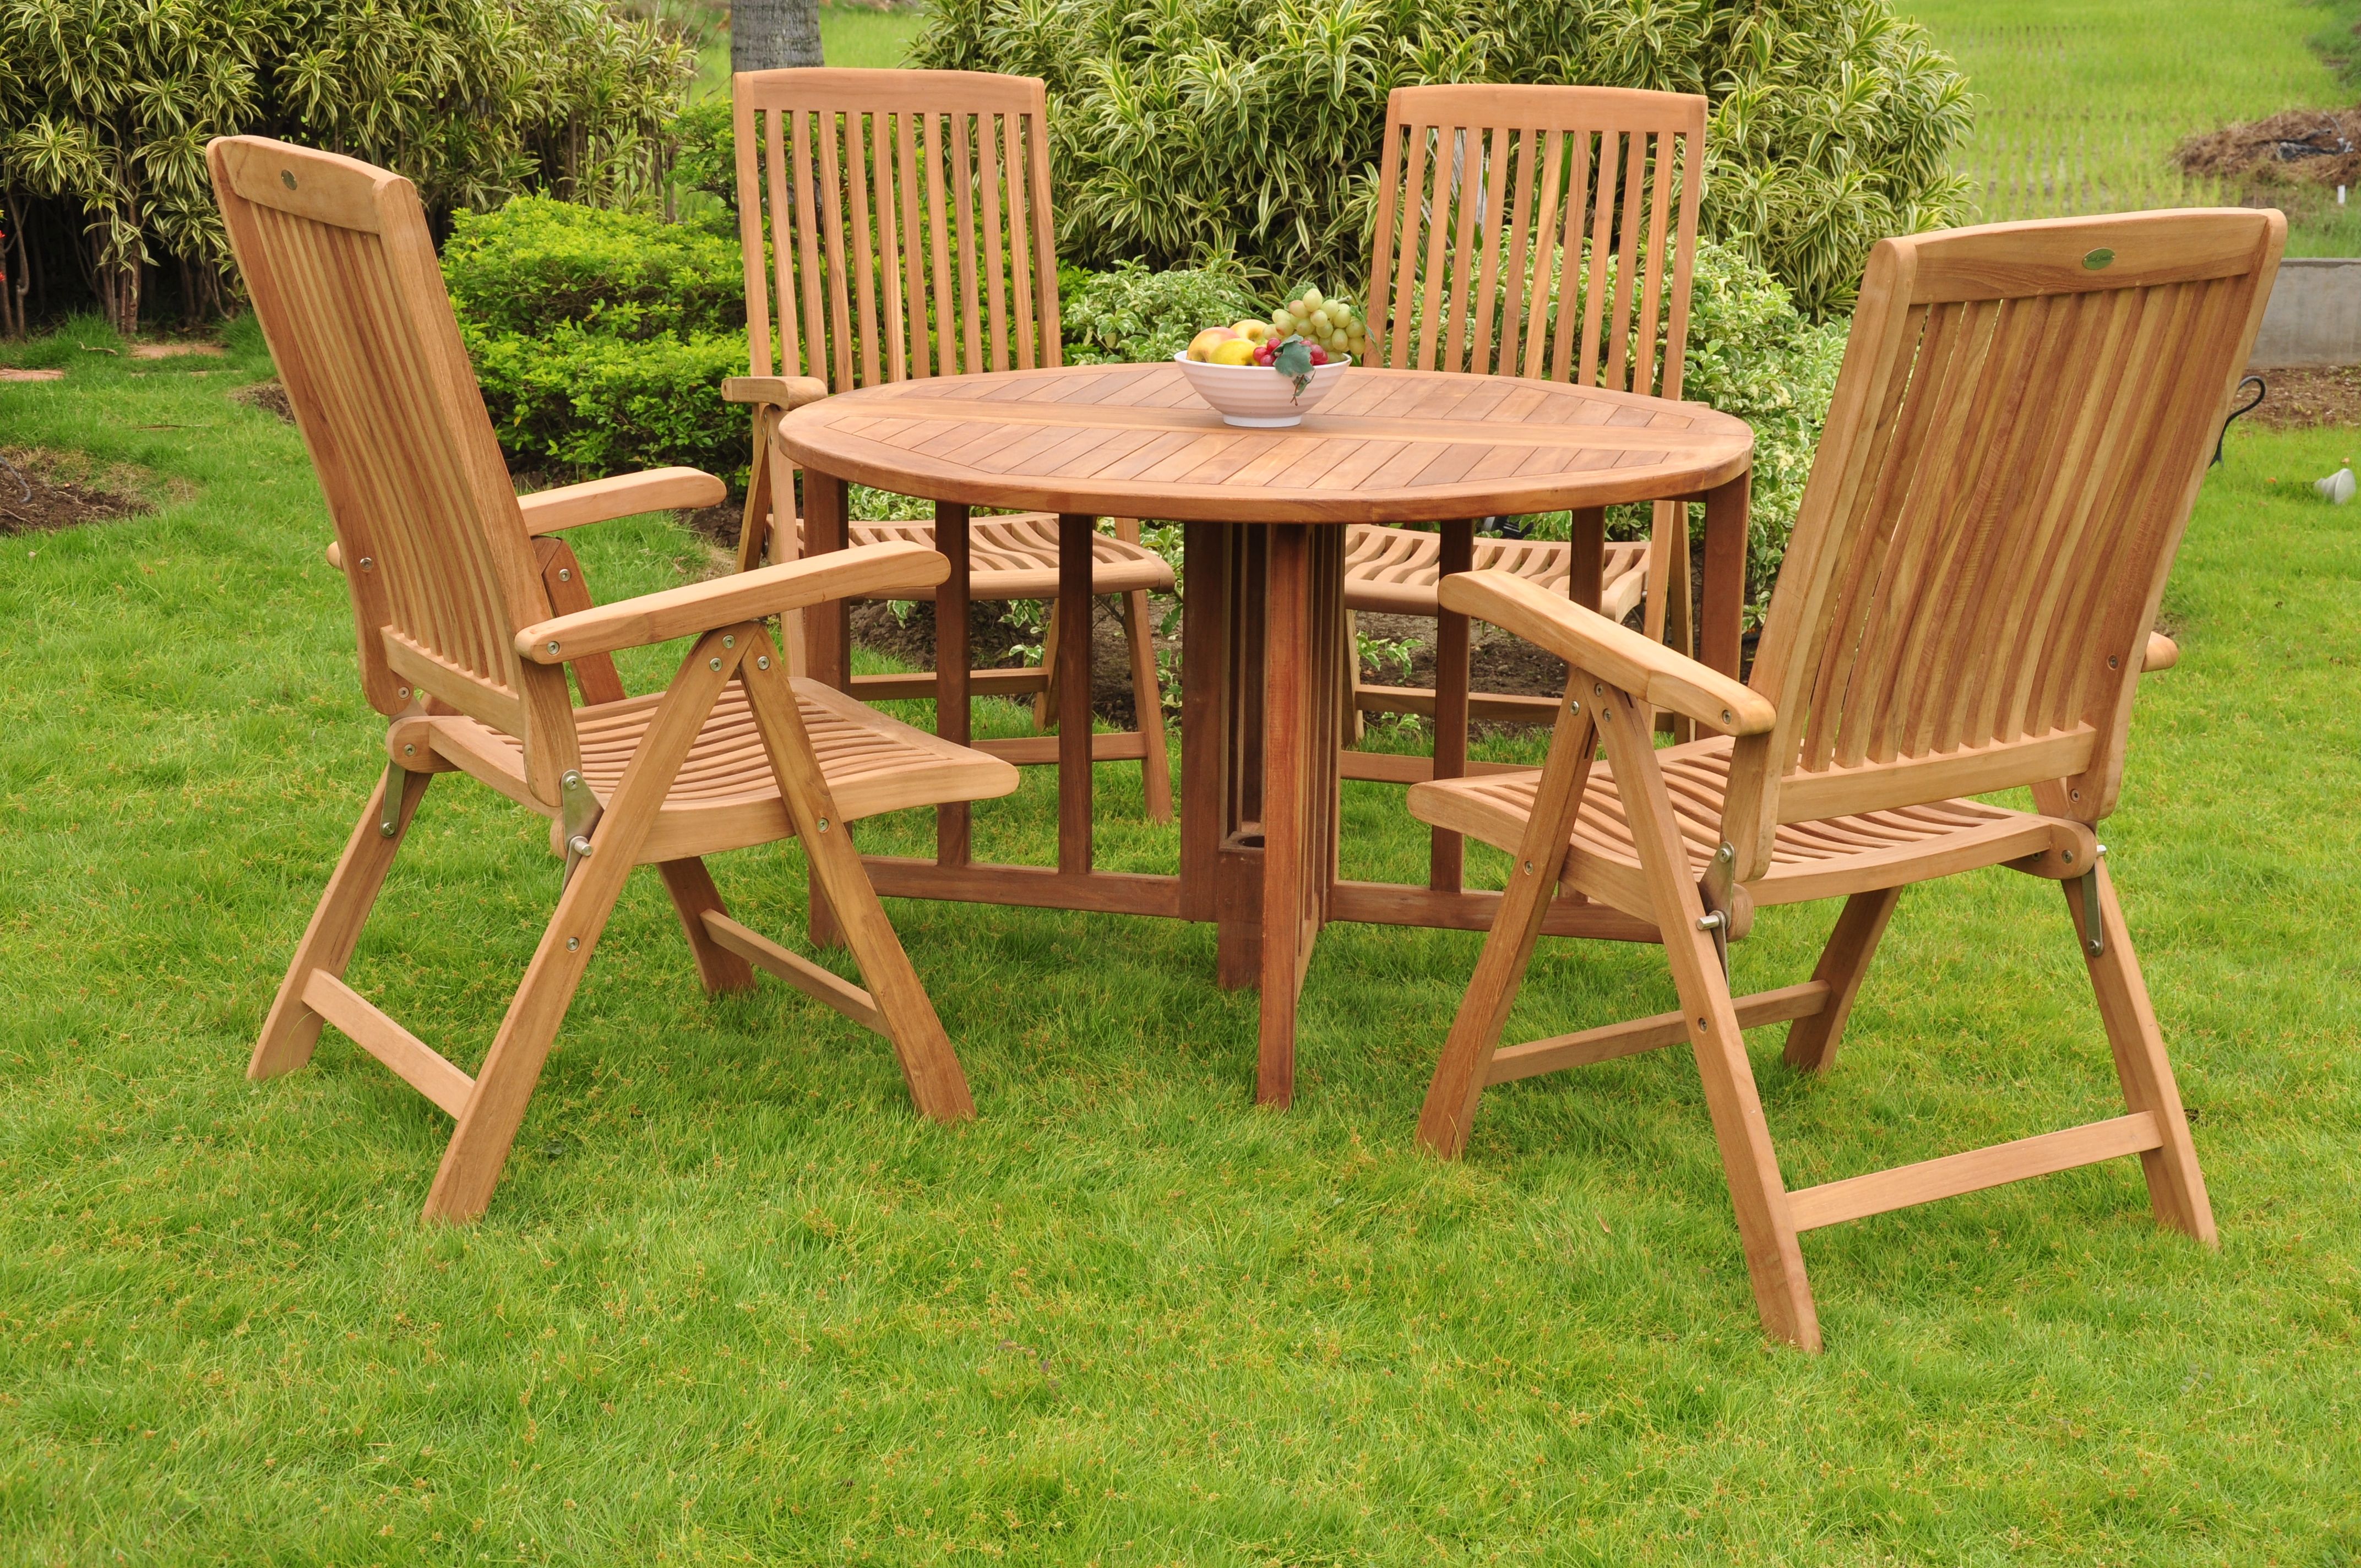 Teak Dining Set:4 Seater 5 Pc - 48" Round Table And 4 Marley Reclining Arm Chairs Outdoor Patio Grade-A Teak Wood WholesaleTeak #WMDSMR1 - image 1 of 4